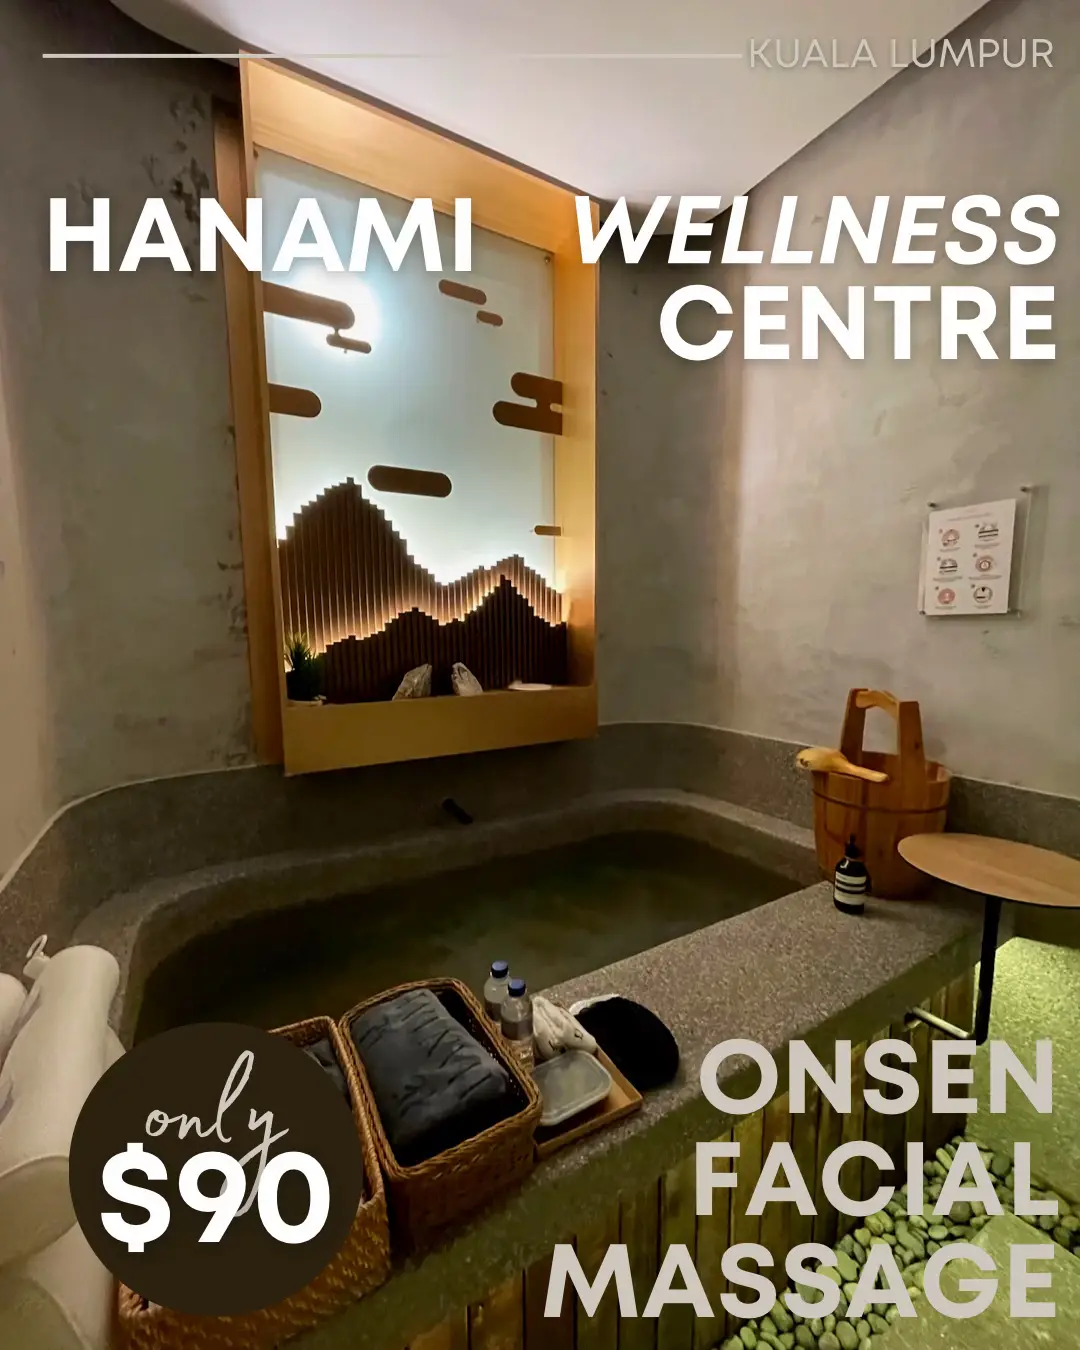 onsen, facial & massage for ONLY $90 🧖🏻‍♀️👀's images(0)